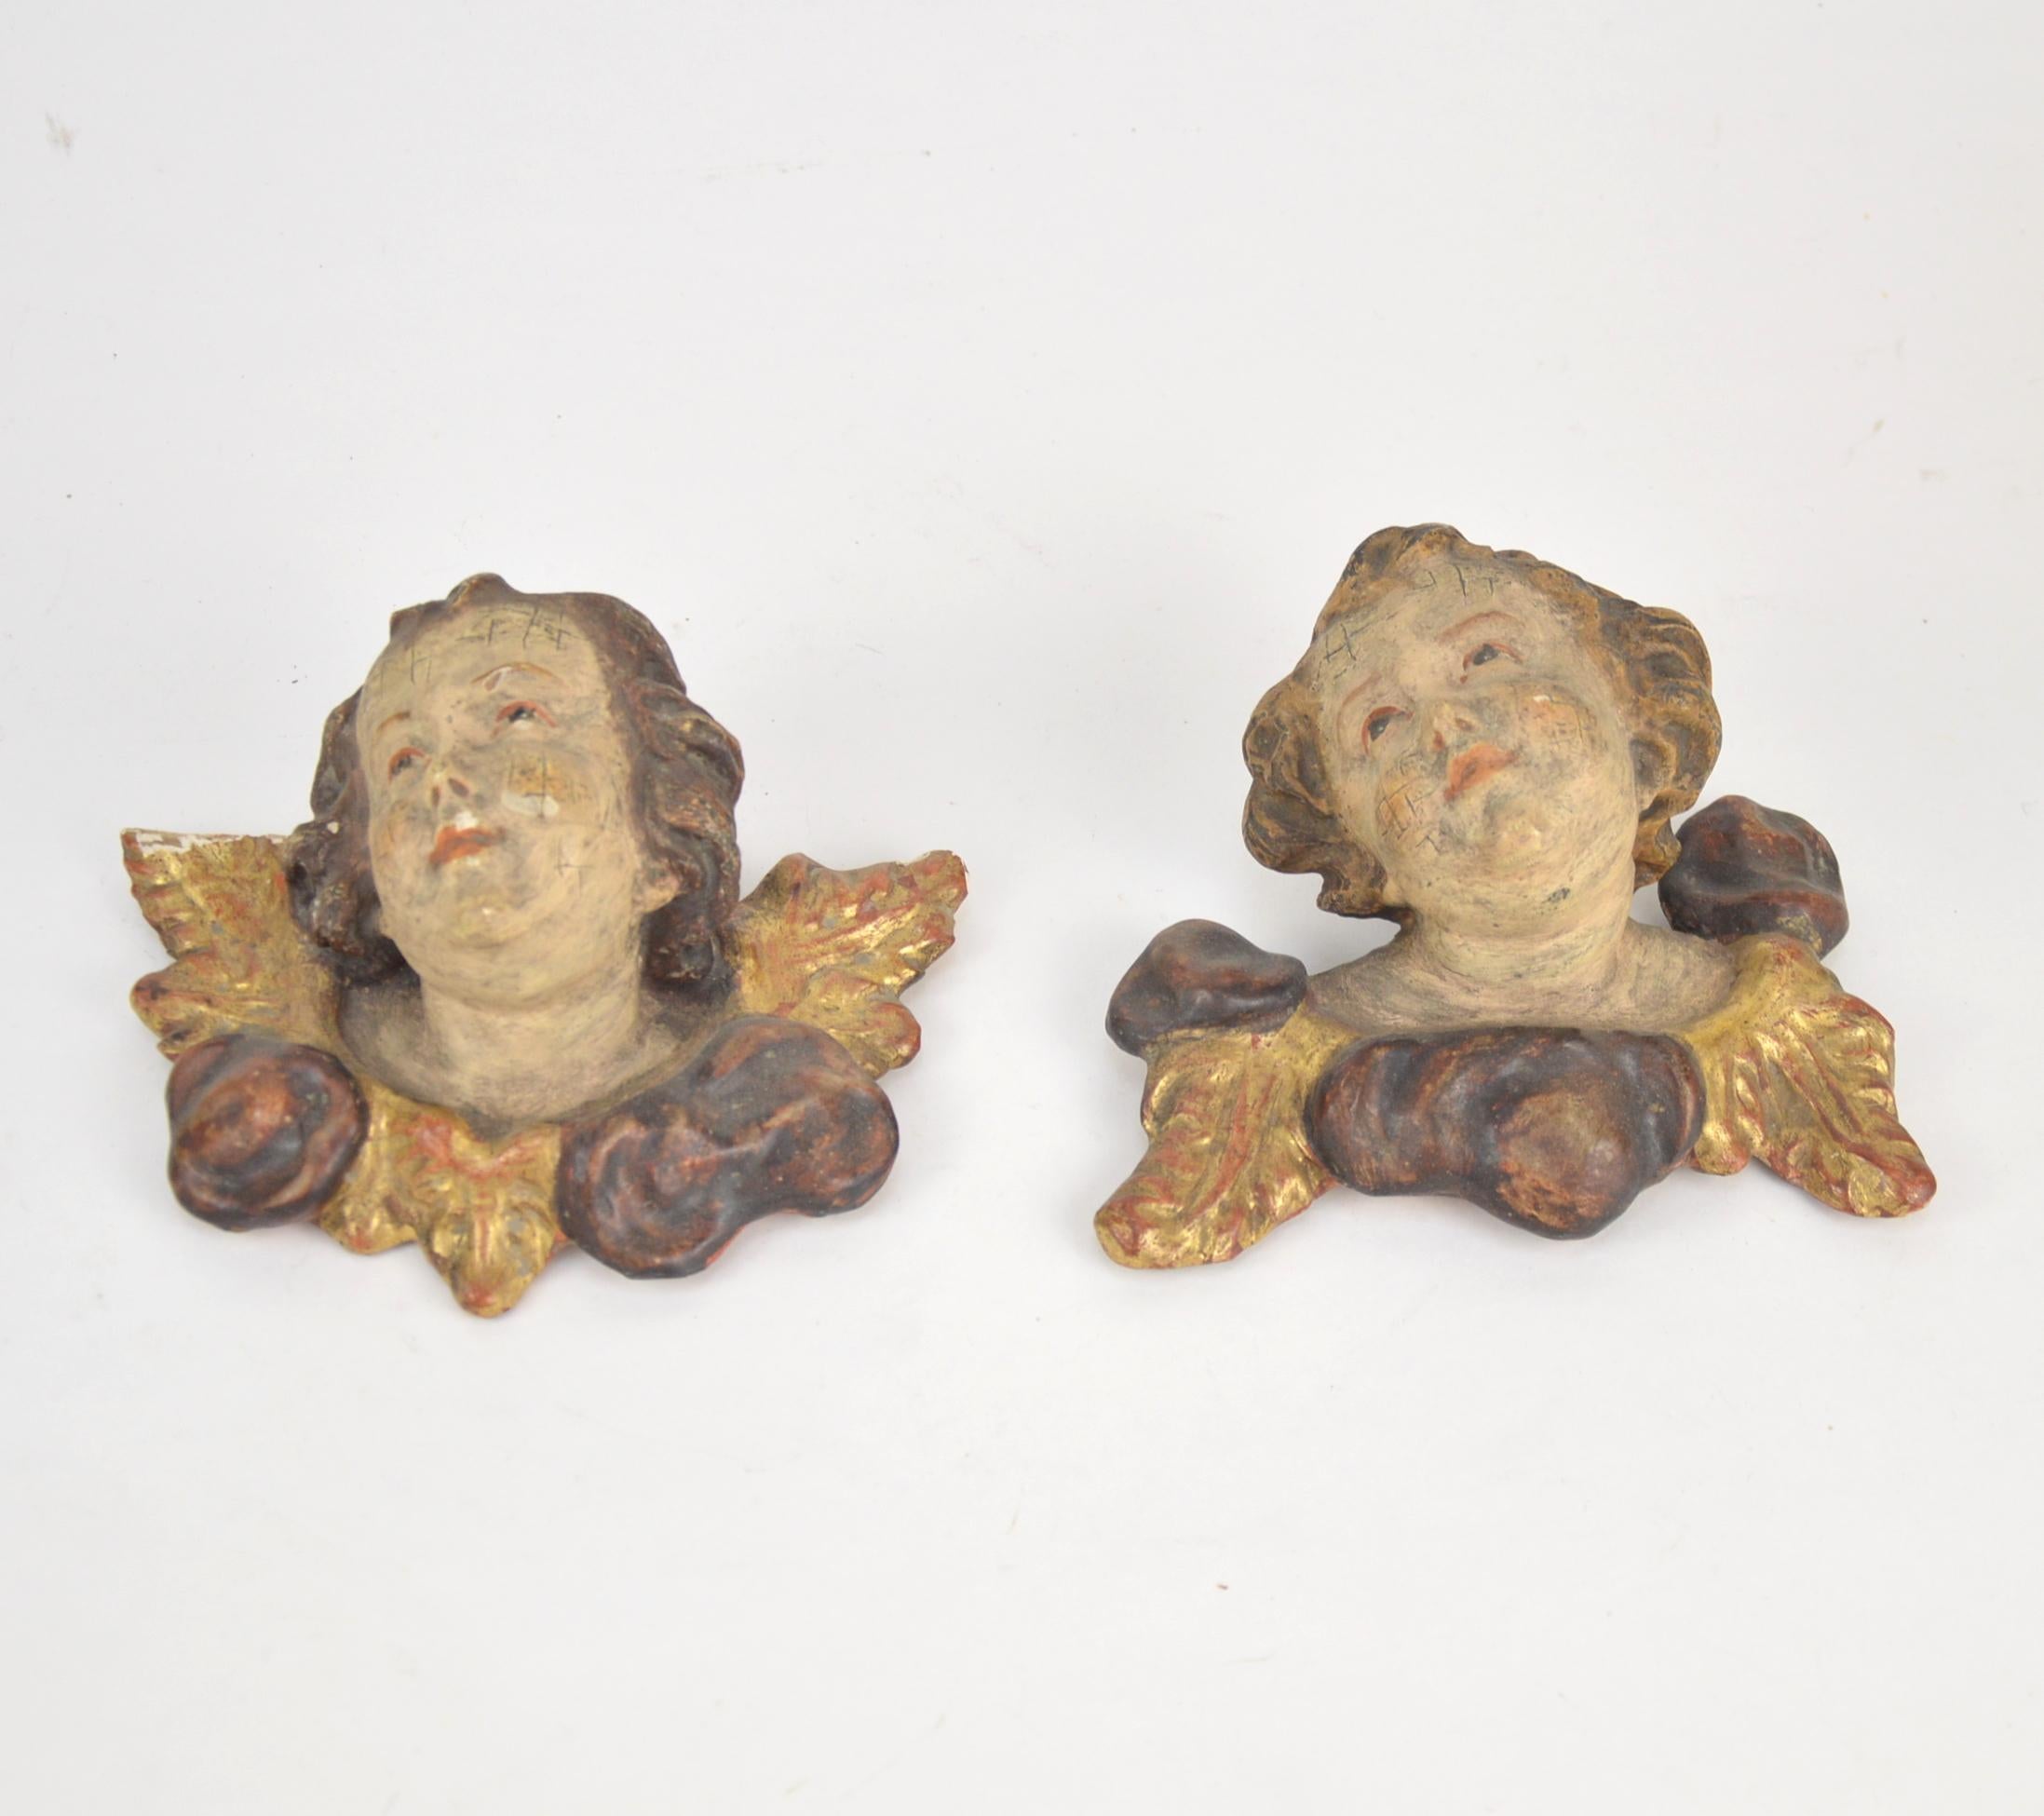 Pair of wooden wall-mounted sculptures representing angel heads, 19th century. Probably France.